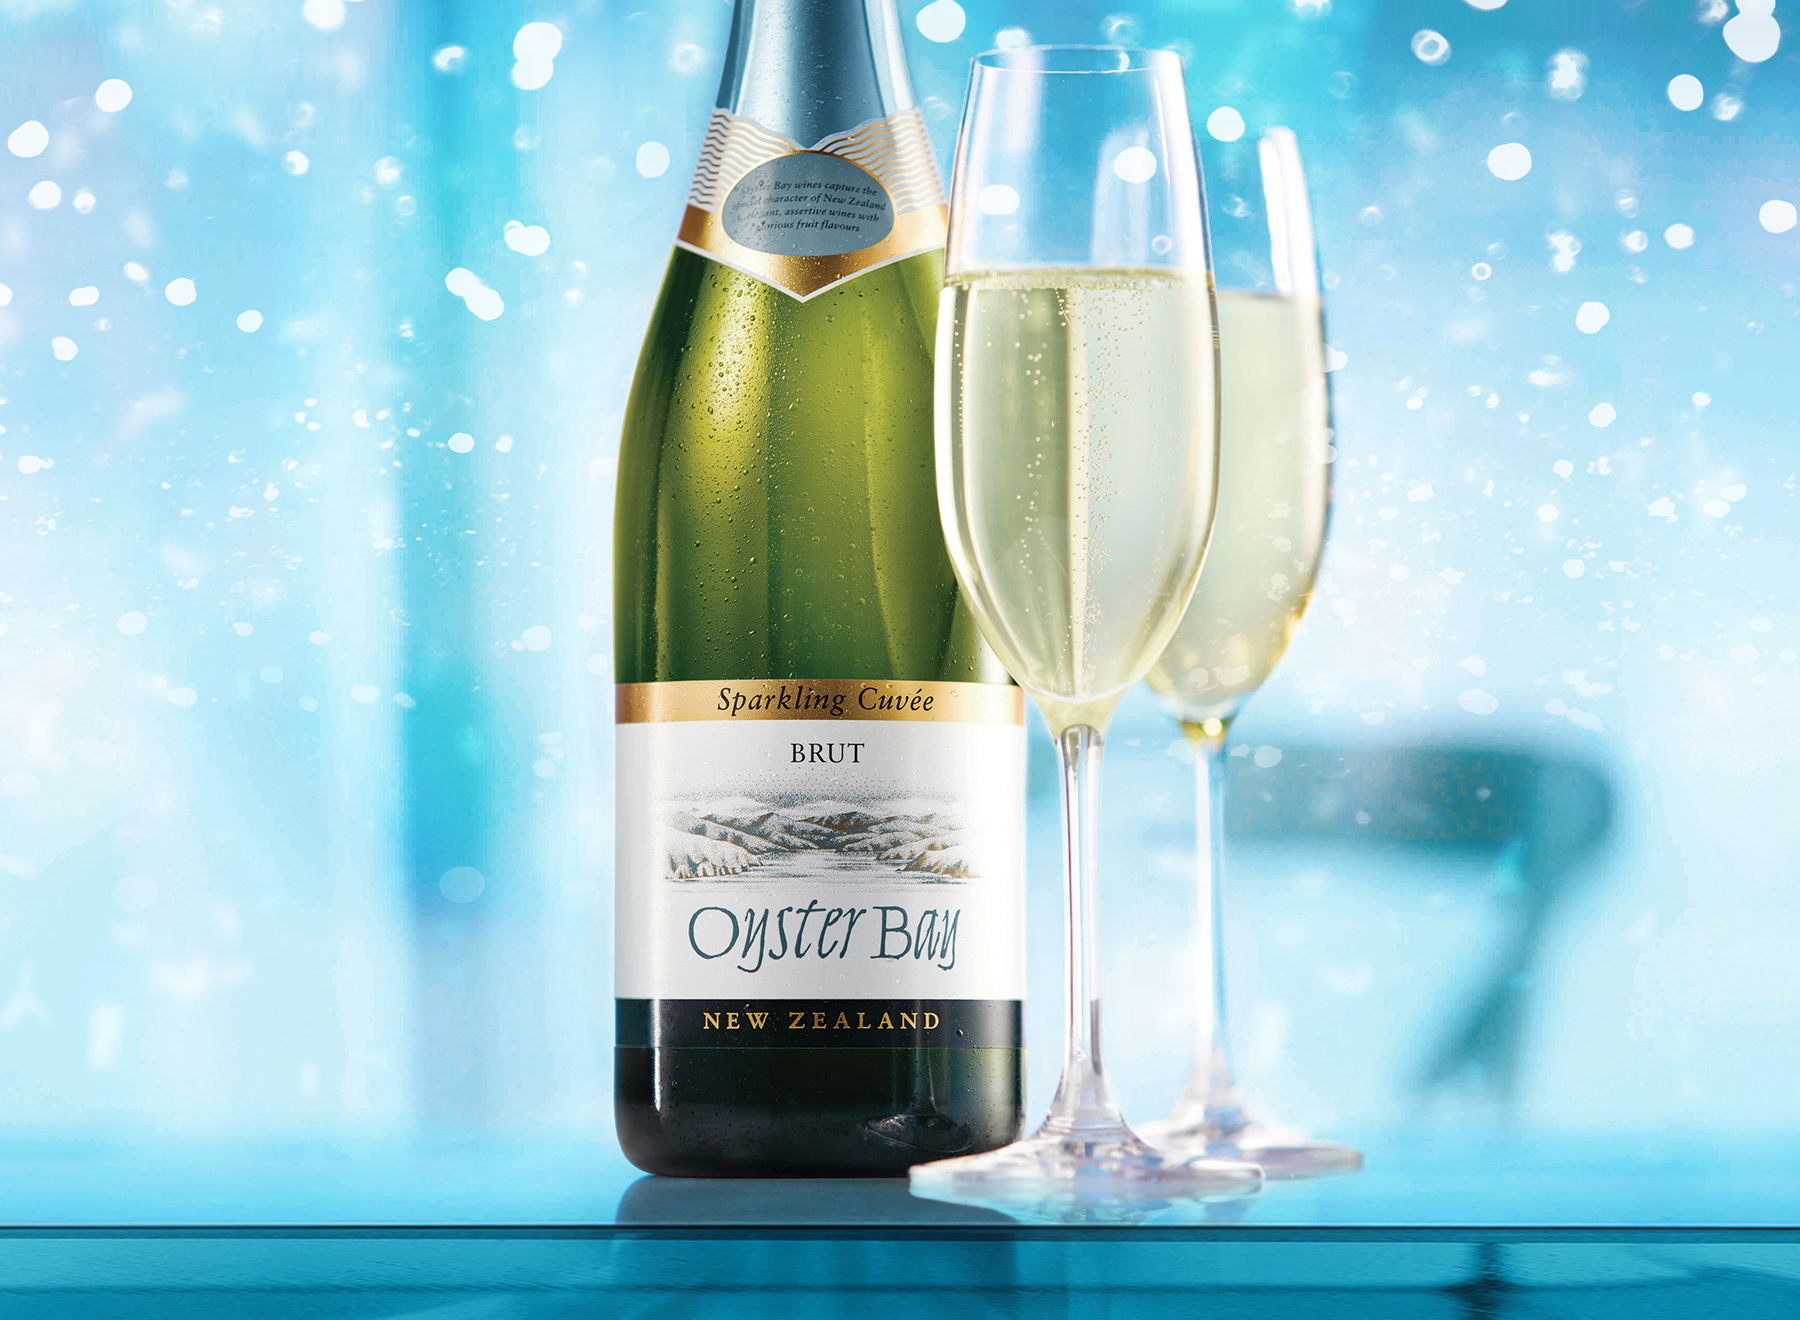 Oyster Bay New Zealand Sparkling Wine with 2x glasses and confetti